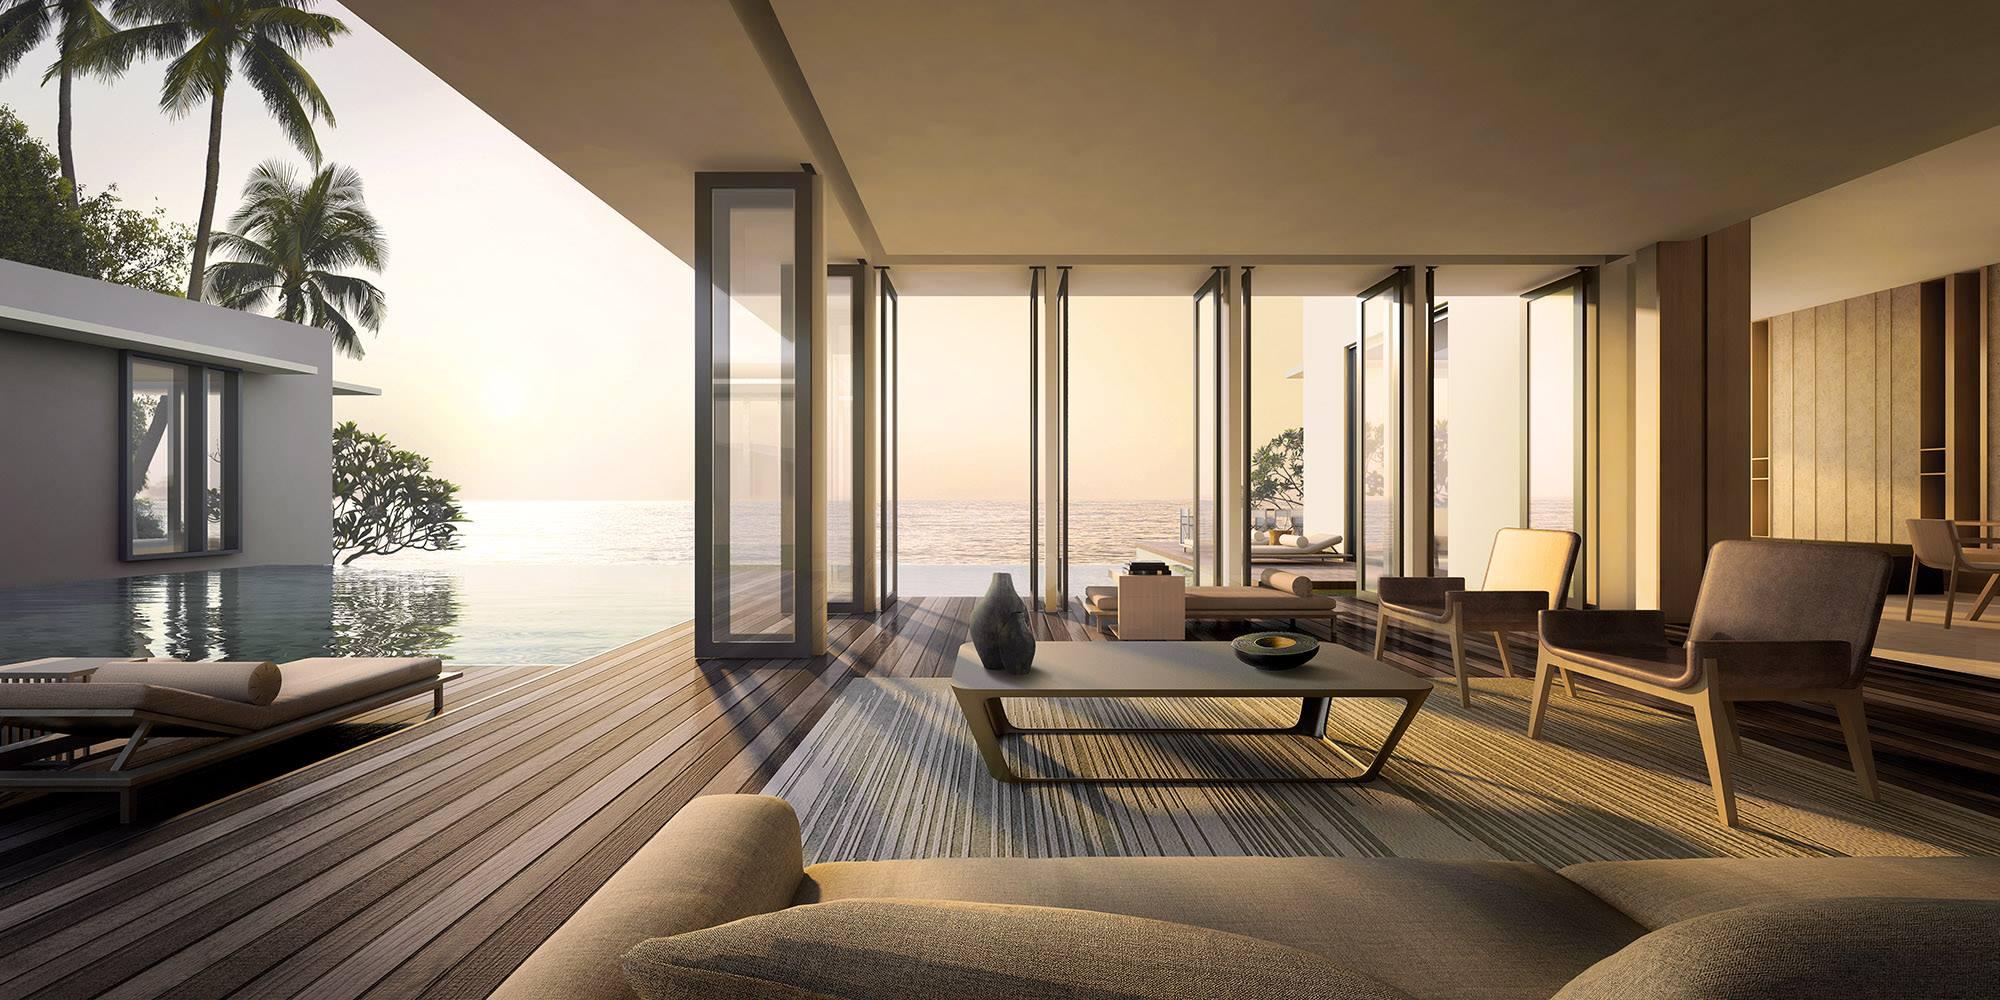 This is how the villas are set to look at the new Alila resort in the Gulf of Thailand